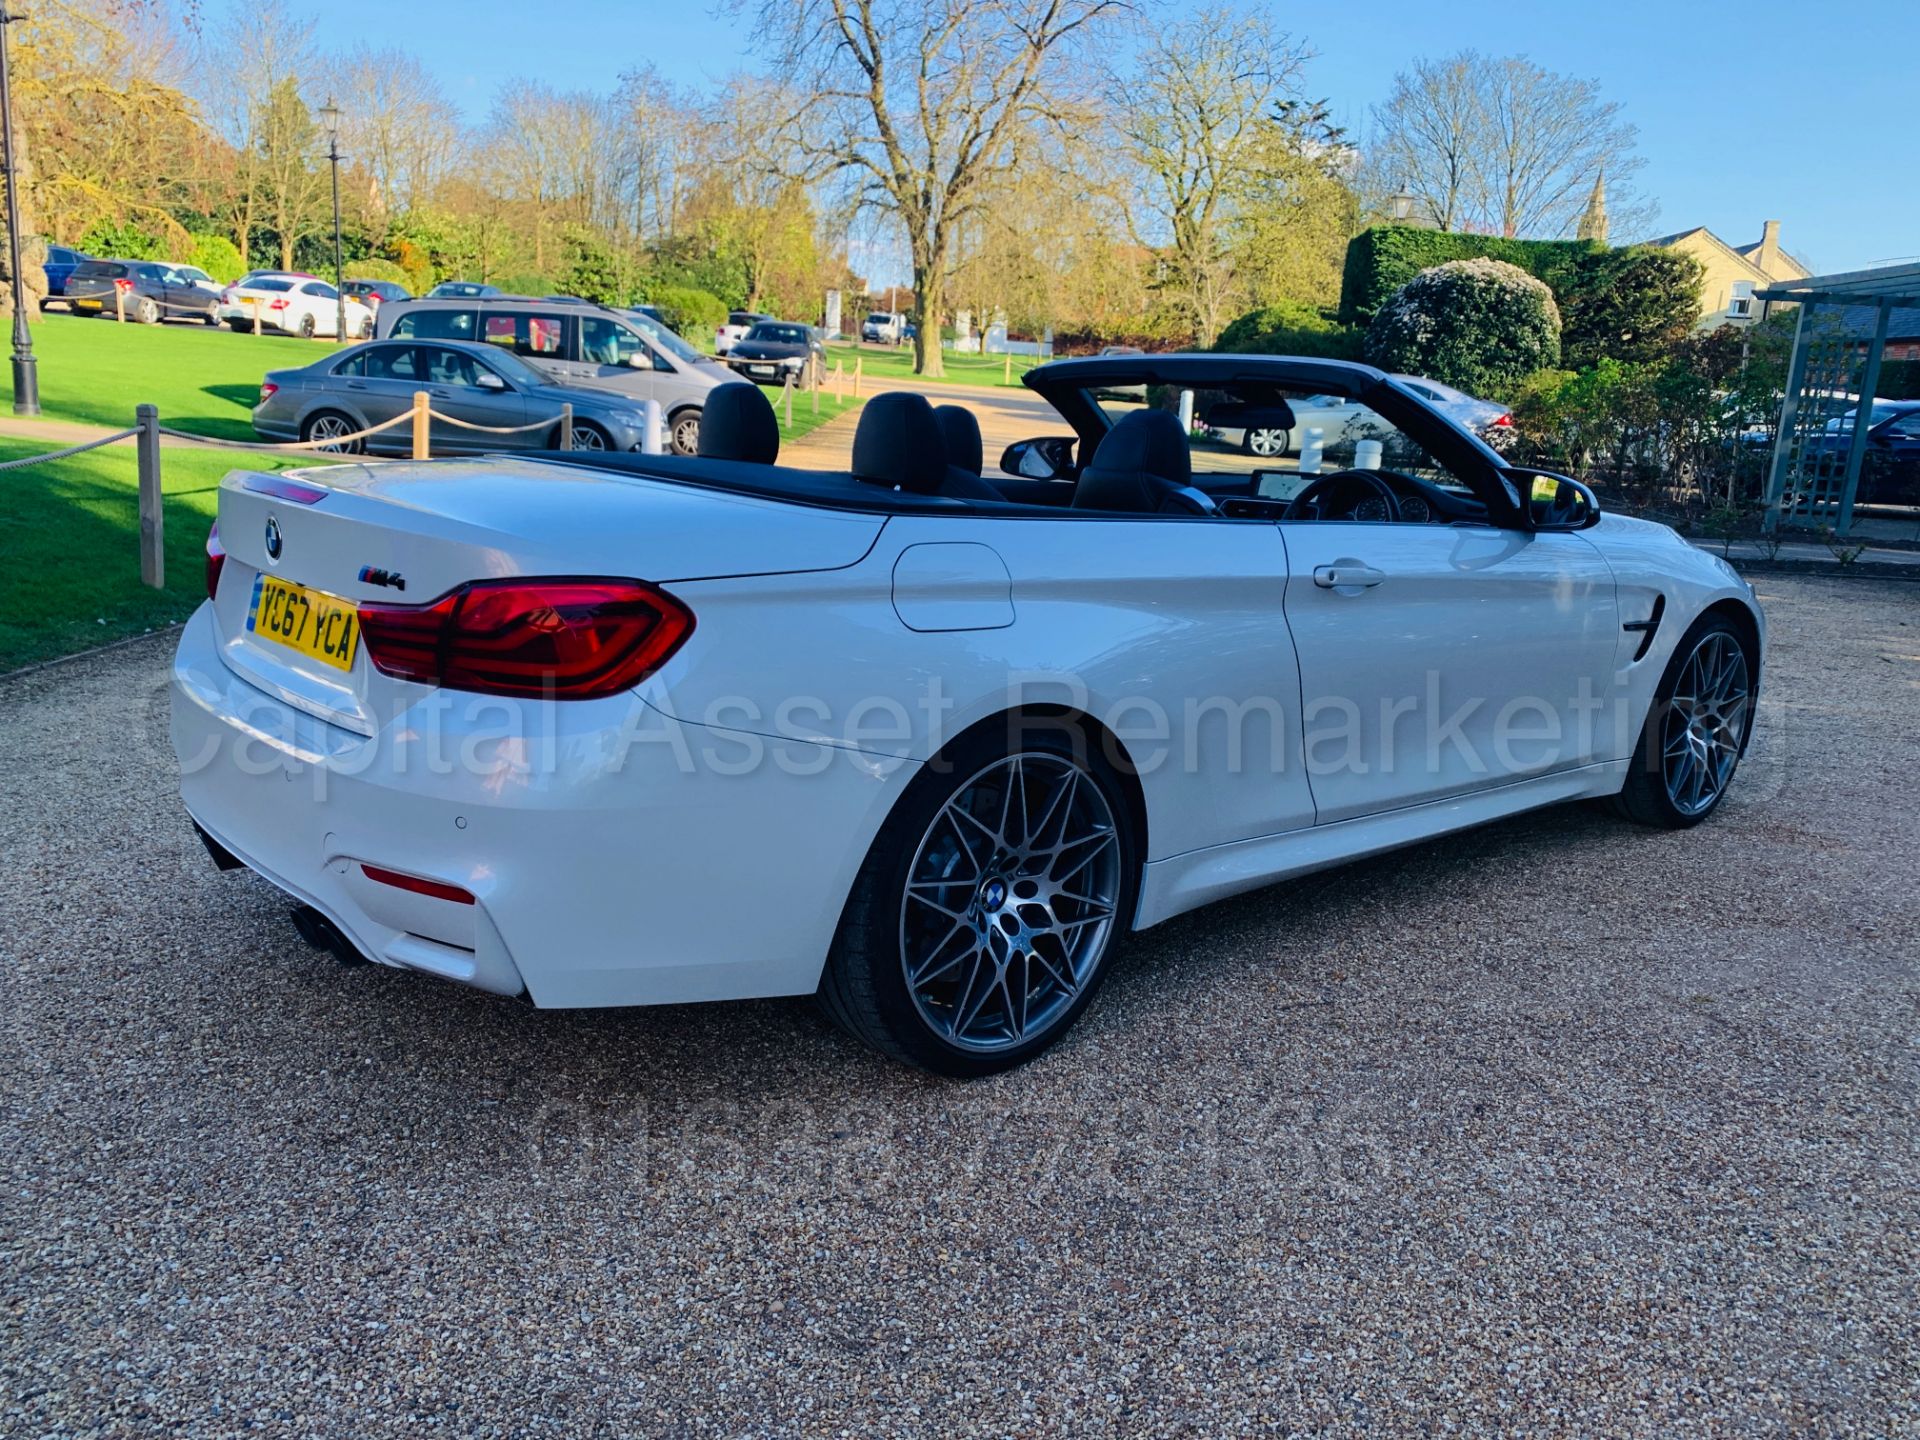 (On Sale) BMW M4 CONVERTIBLE *COMPETITION PACKAGE* (67 REG) 'M DCT AUTO - LEATHER - SAT NAV' *WOW* - Image 21 of 89